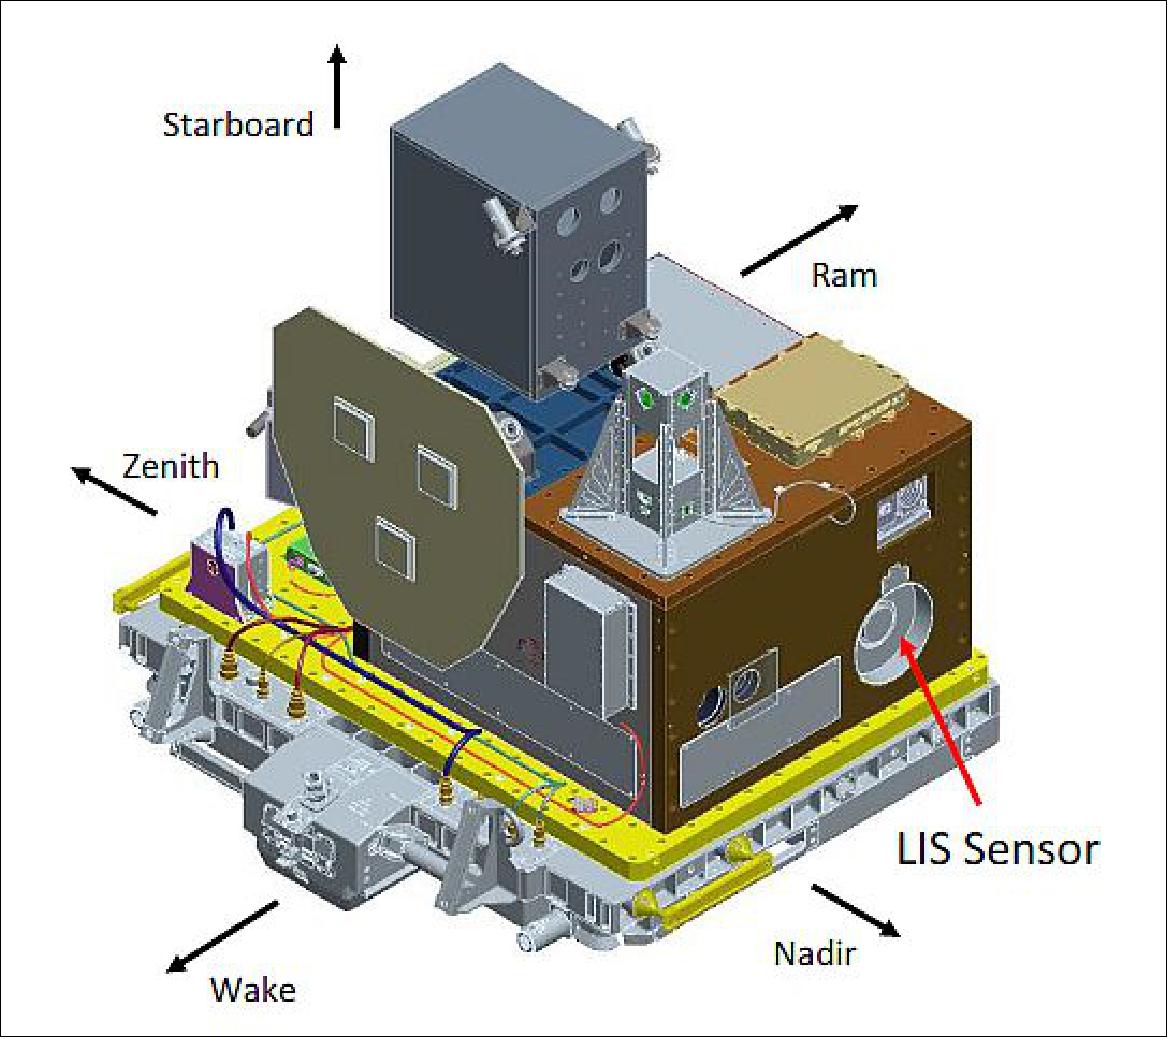 Figure 1: ISS-LIS accommodation, one of 13 instruments on the STP-H5 mission payload (image credit: DoD, NASA/MSFC)